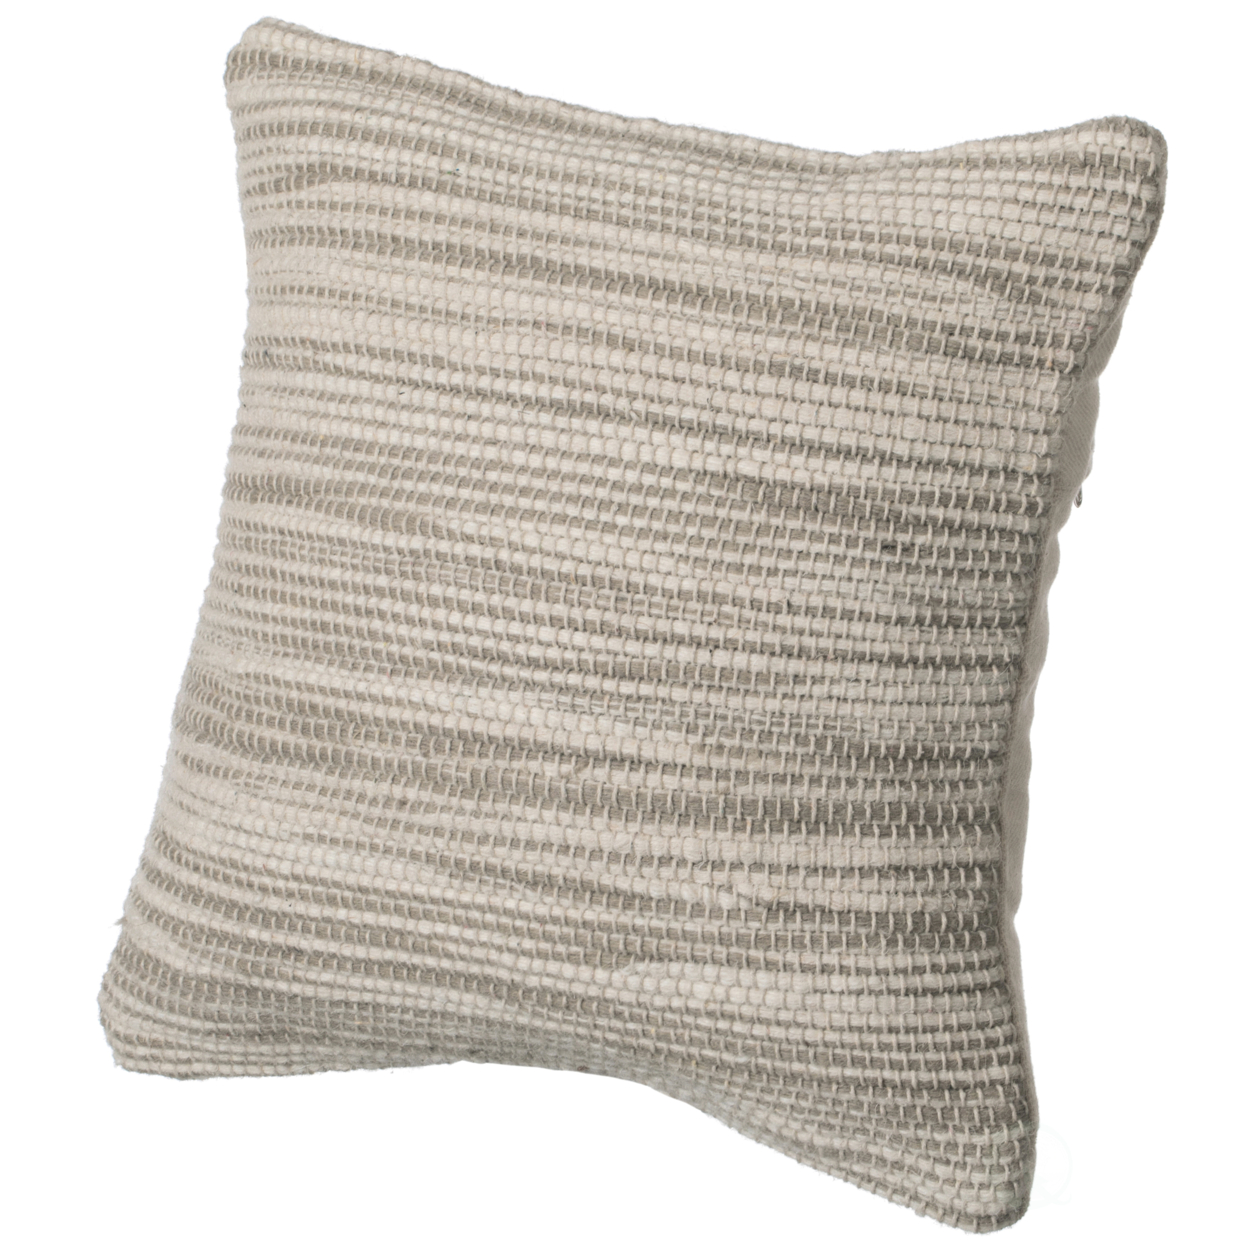 16 Handwoven Wool & Cotton Throw Pillow Cover With Woven Knit Texture - Blue